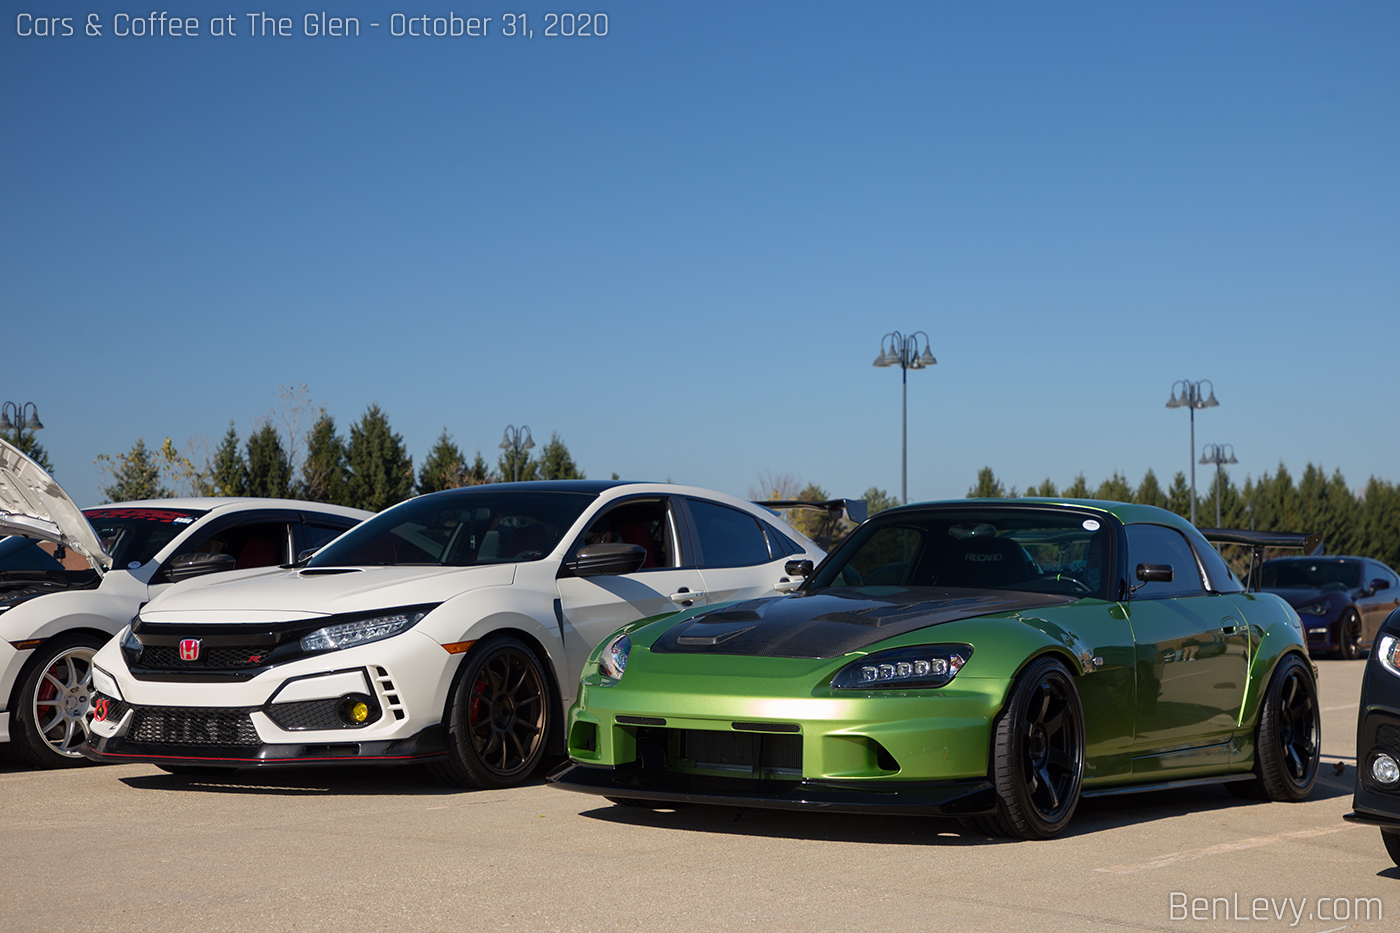 Civic Type-R and S2000 at Cars & Coffee